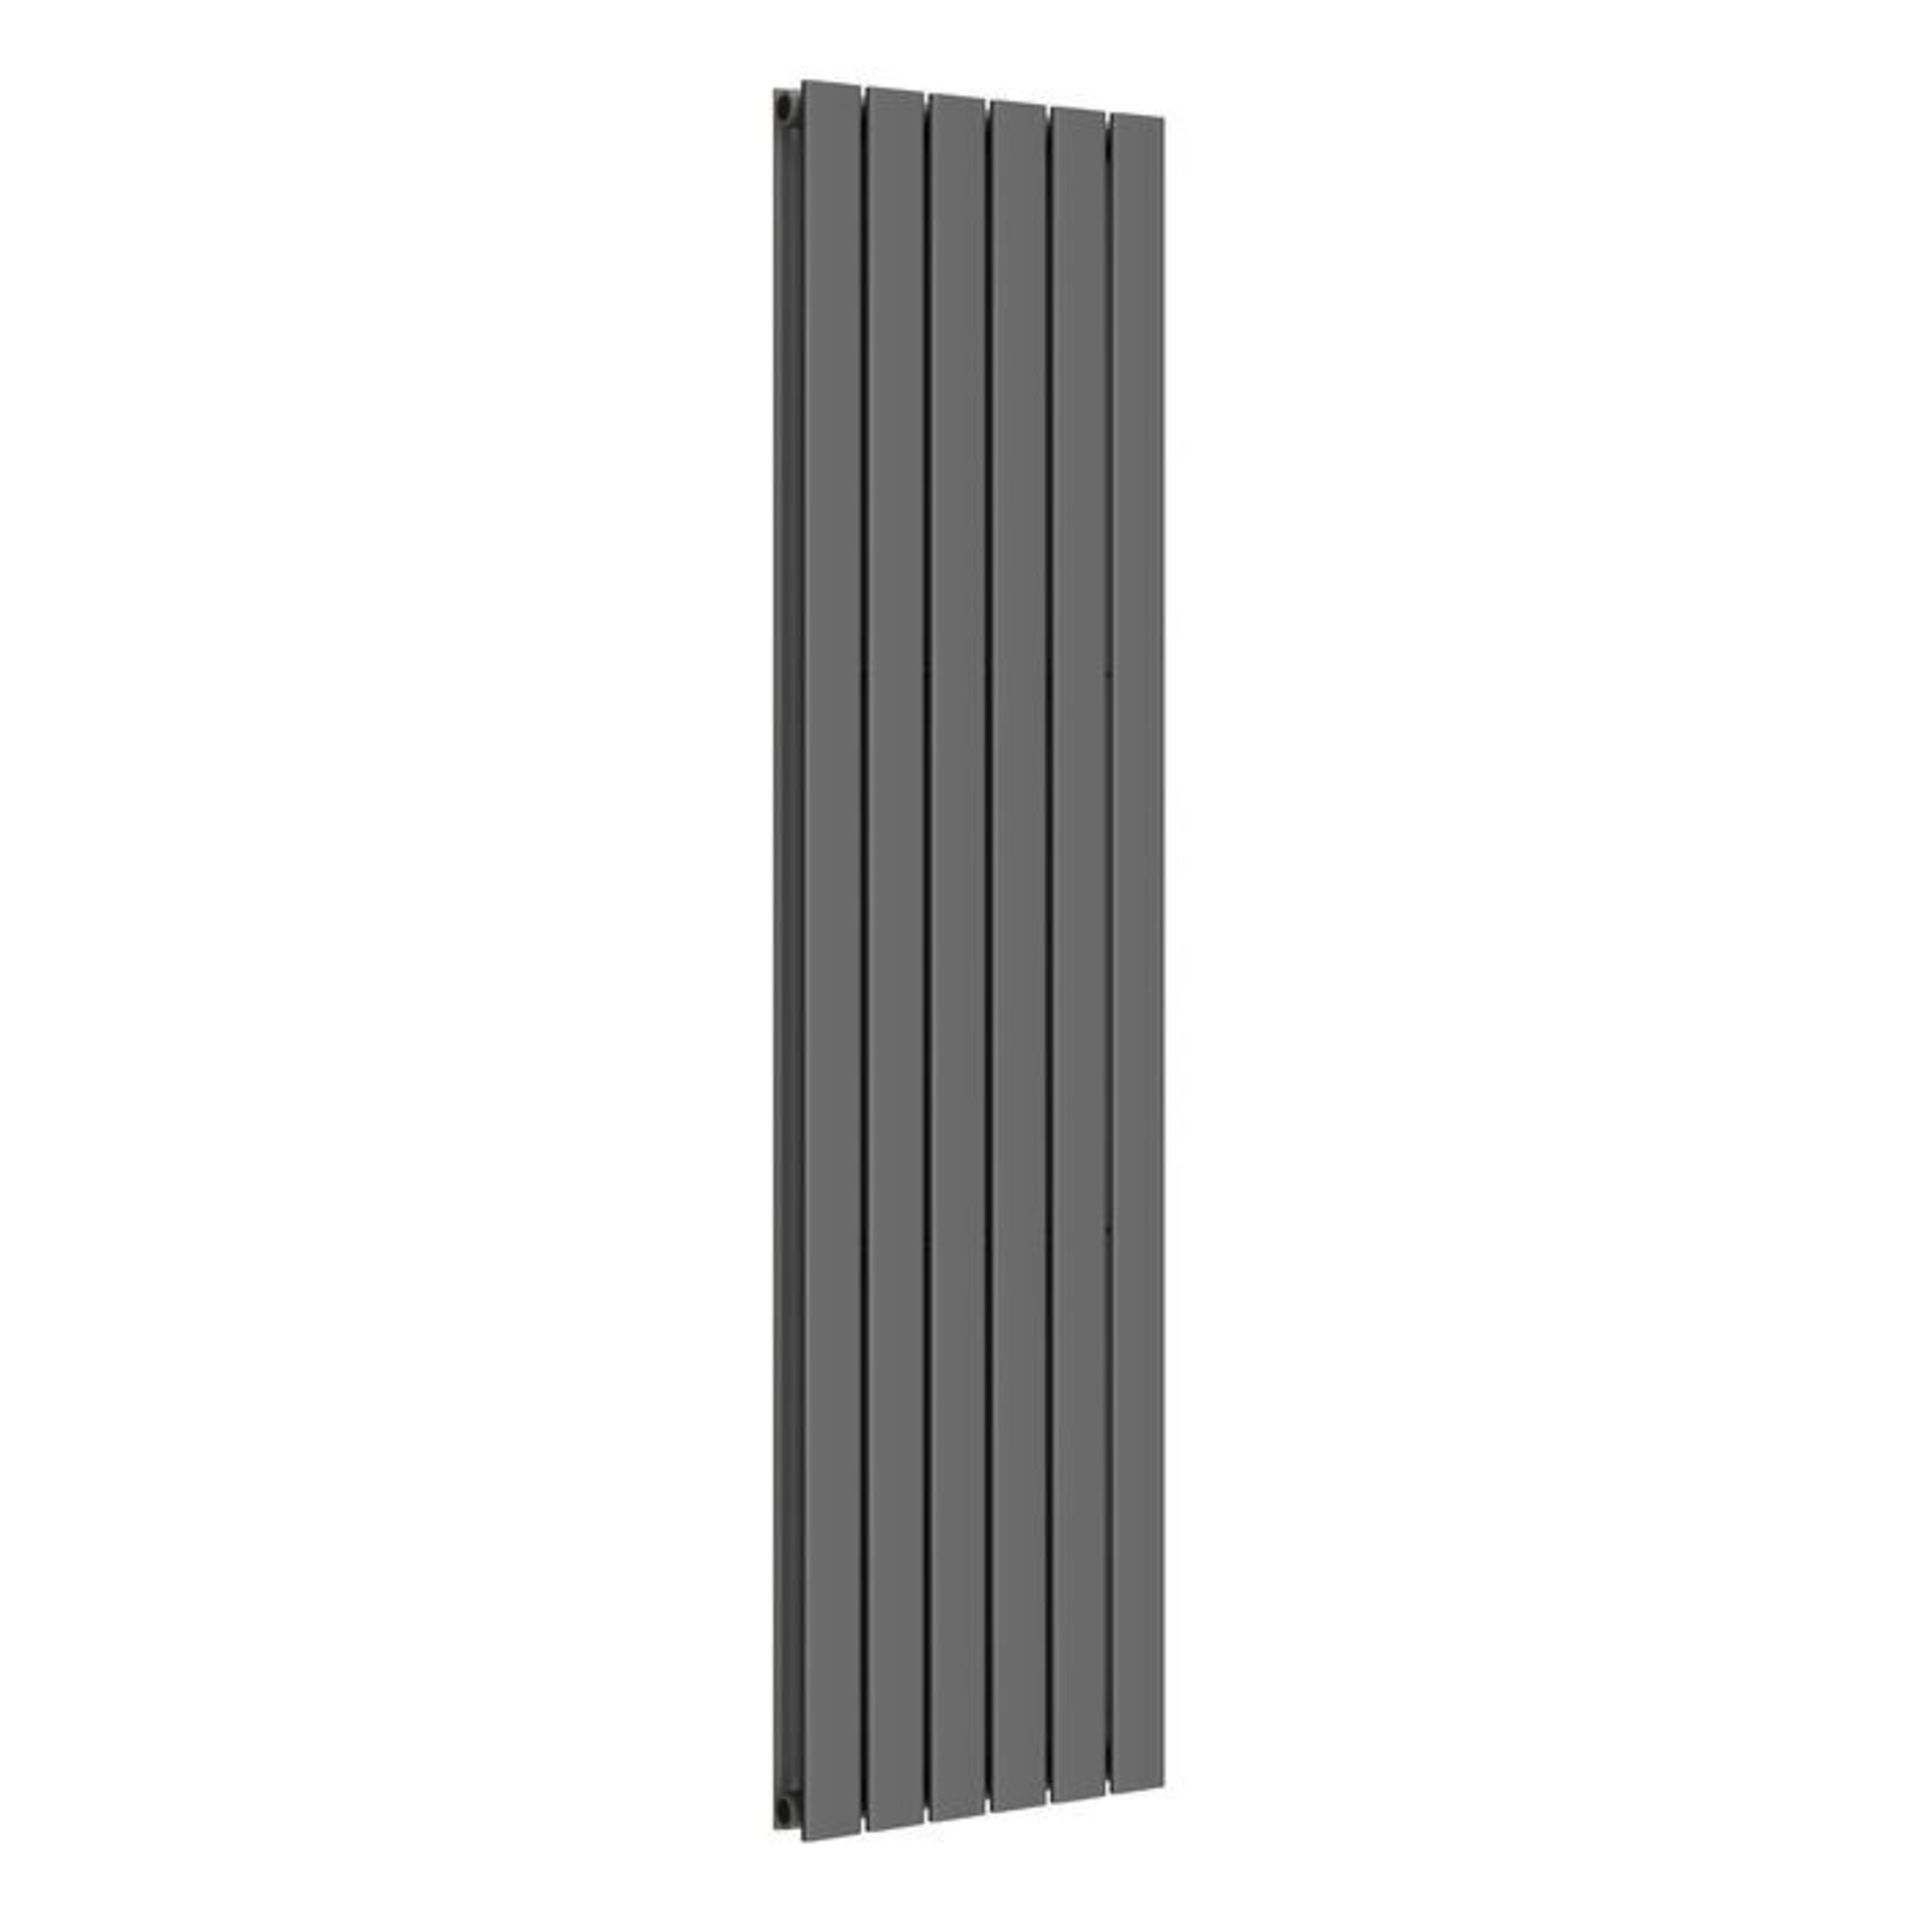 PALLET TO CONTAIN 6 x BRAND NEW BOXED 1800x480mm Anthracite Double Flat Panel Vertical Radiator... - Image 3 of 3